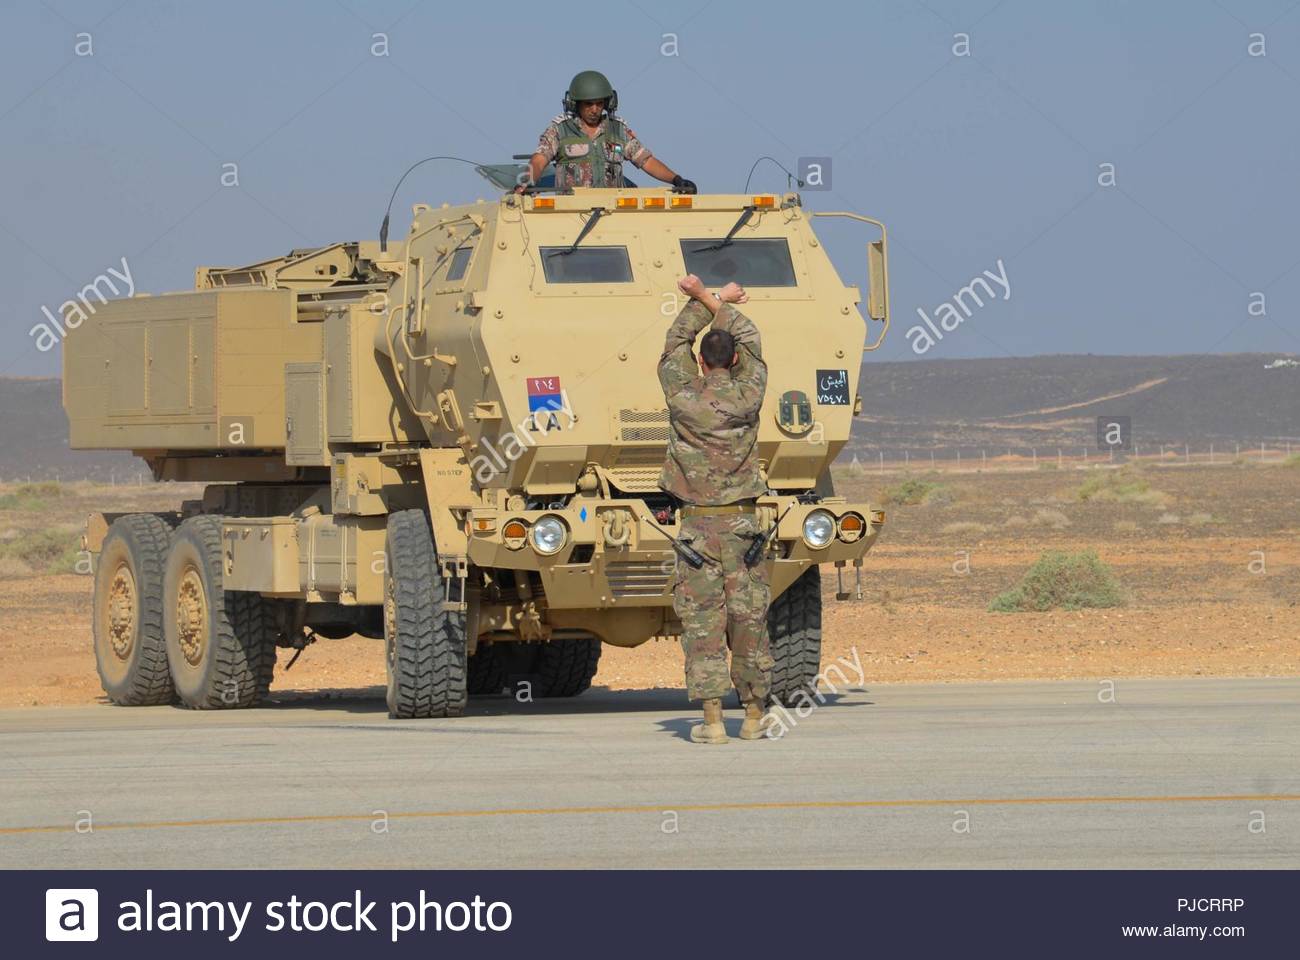 muwaffaq-salti-air-base-jordan-soldiers-with-the-us-armys-alpha-battery-1st-battalion-14th-field-artillery-regiment-and-the-jordanian-armys-29th-royal-himars-battalion-prepare-for-a-high-mobility-artillery-rocket-system-himars-live-fire-during-the-bi-lateral-lion-flight-training-exercise-on-july-23-2018-PJCRRP.jpg